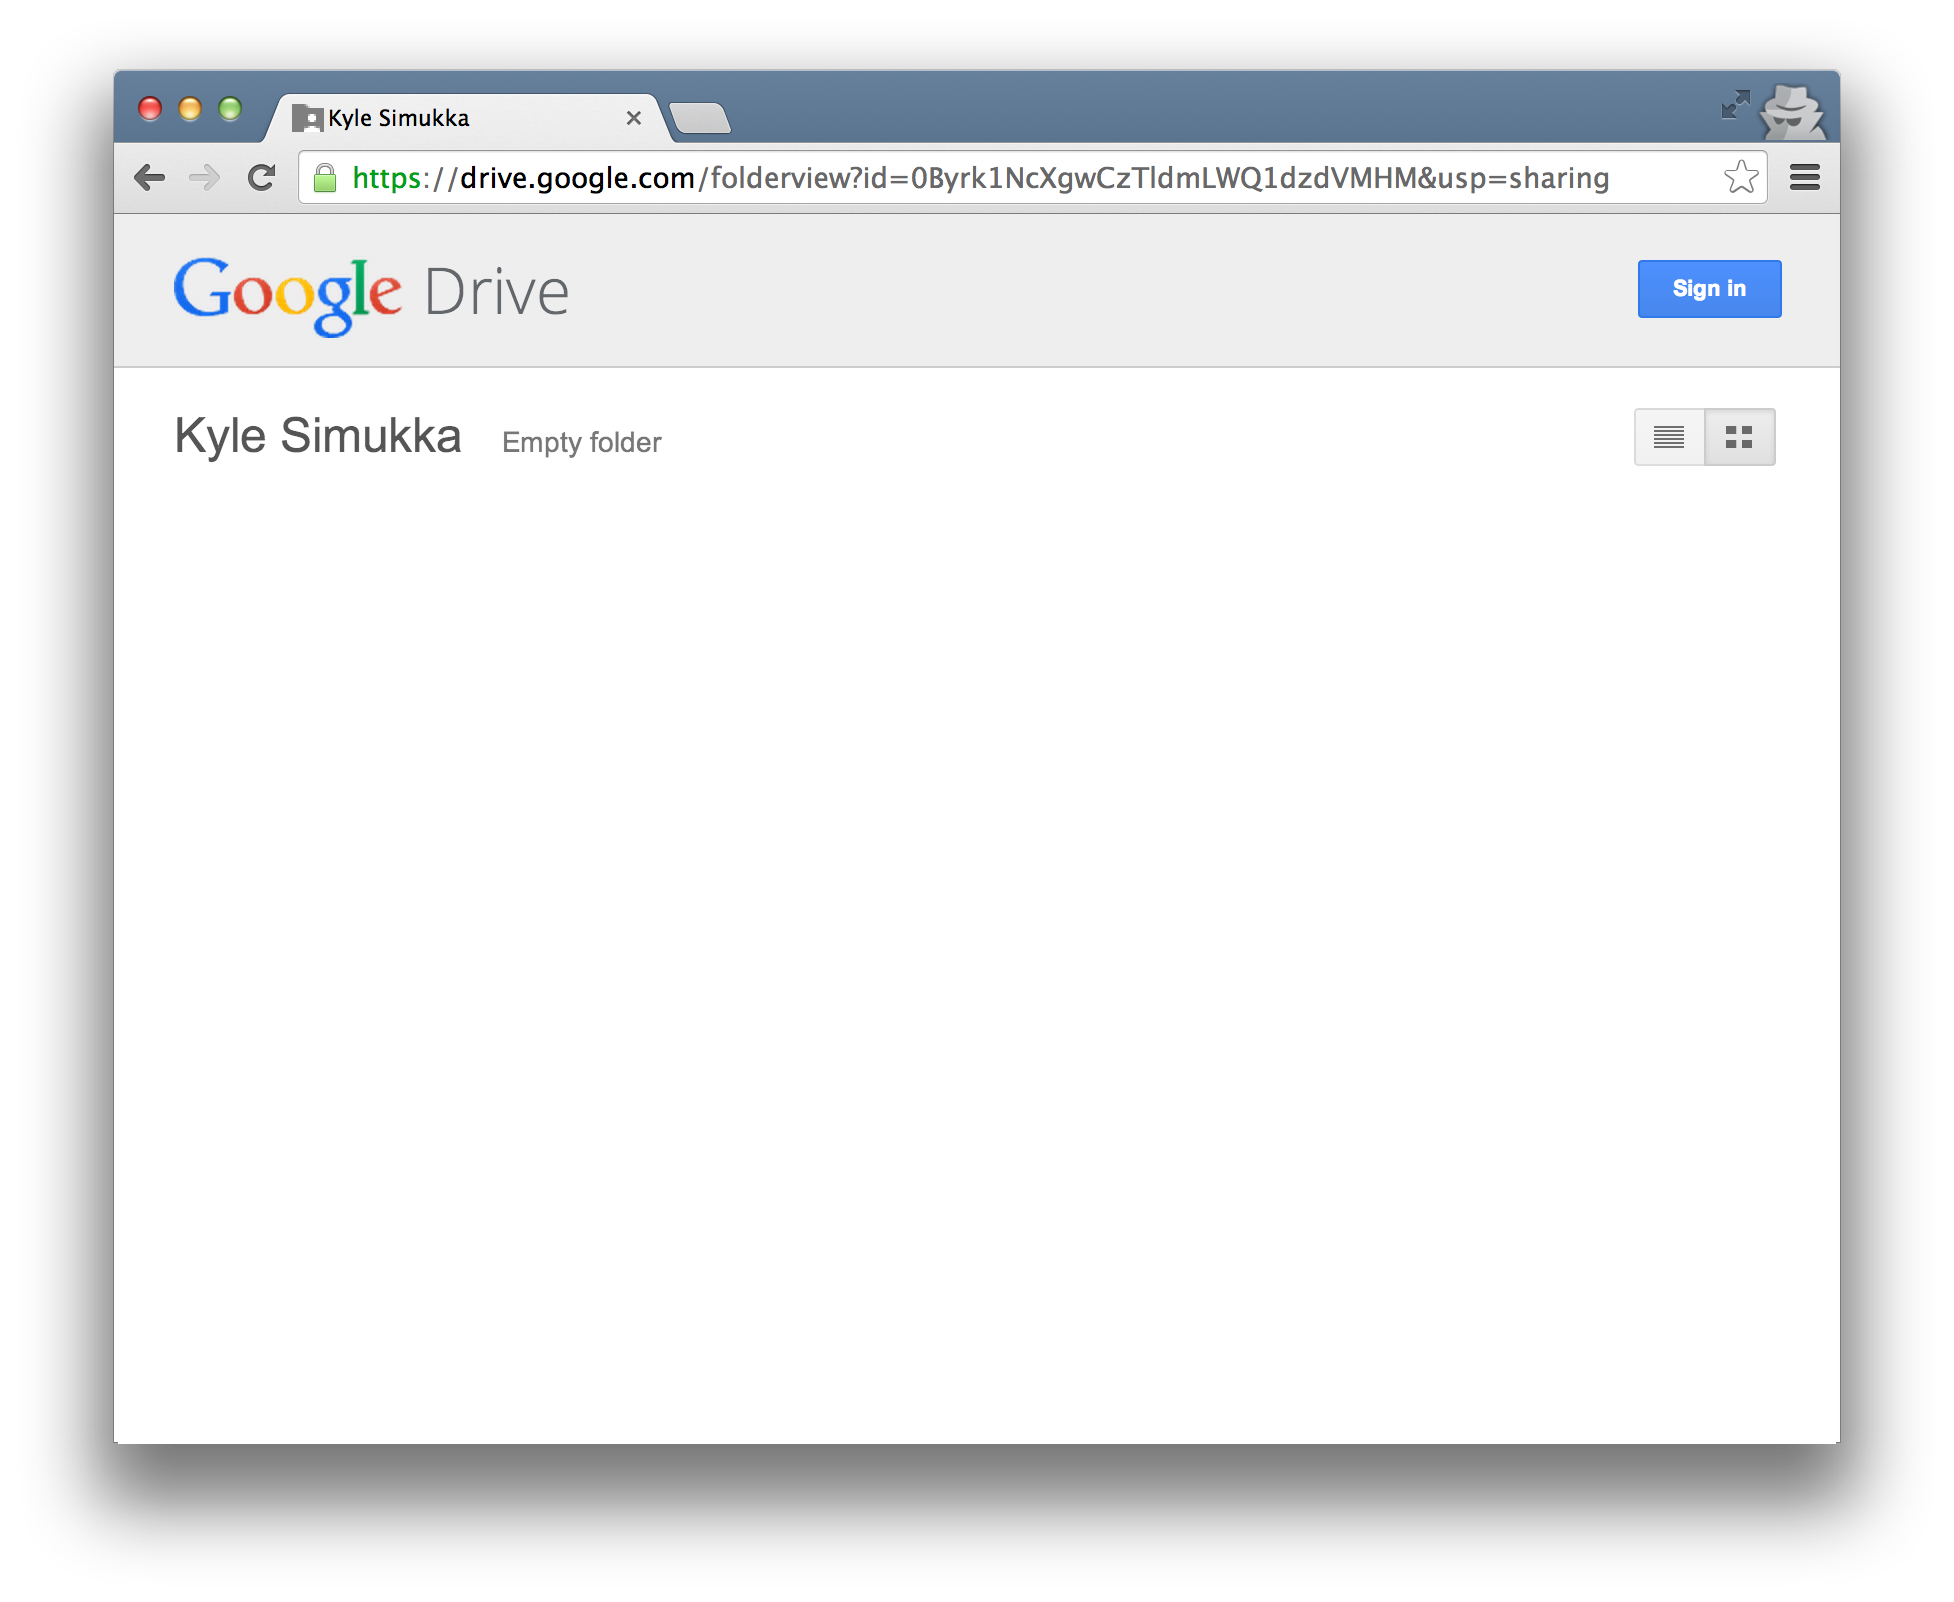 on the Google Drive url in the email this will open a new window or tab that will look like the following